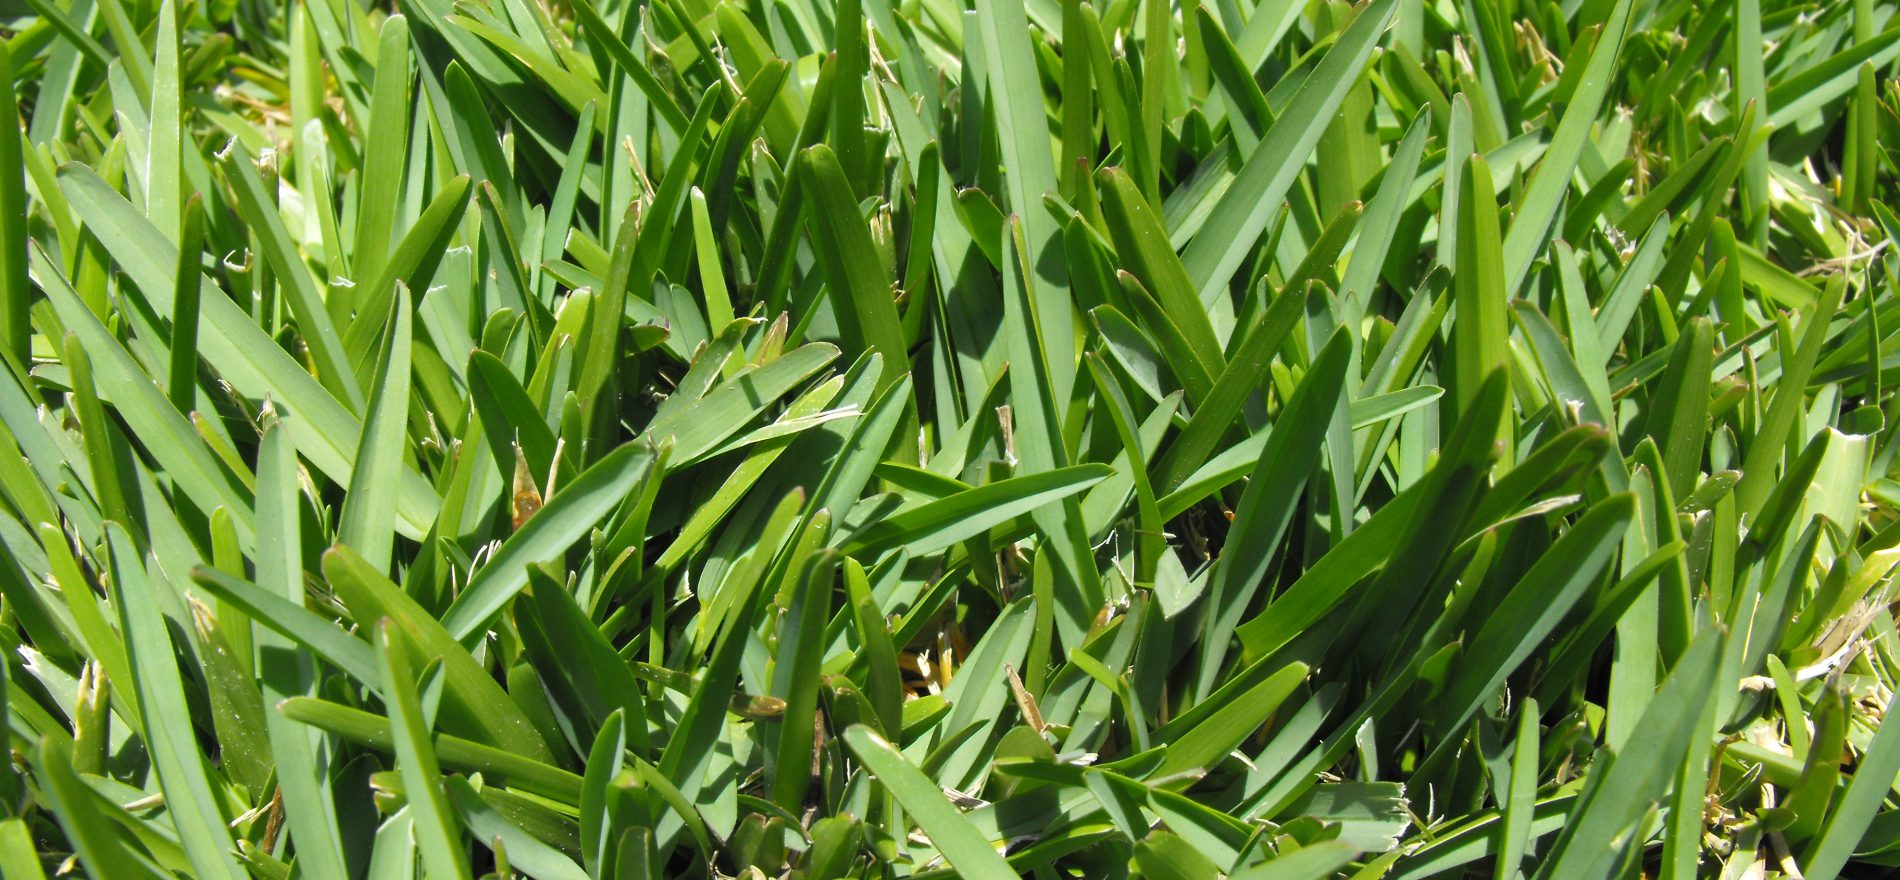 St. Augustine Grass How to grow St. Augustine in southern lawns